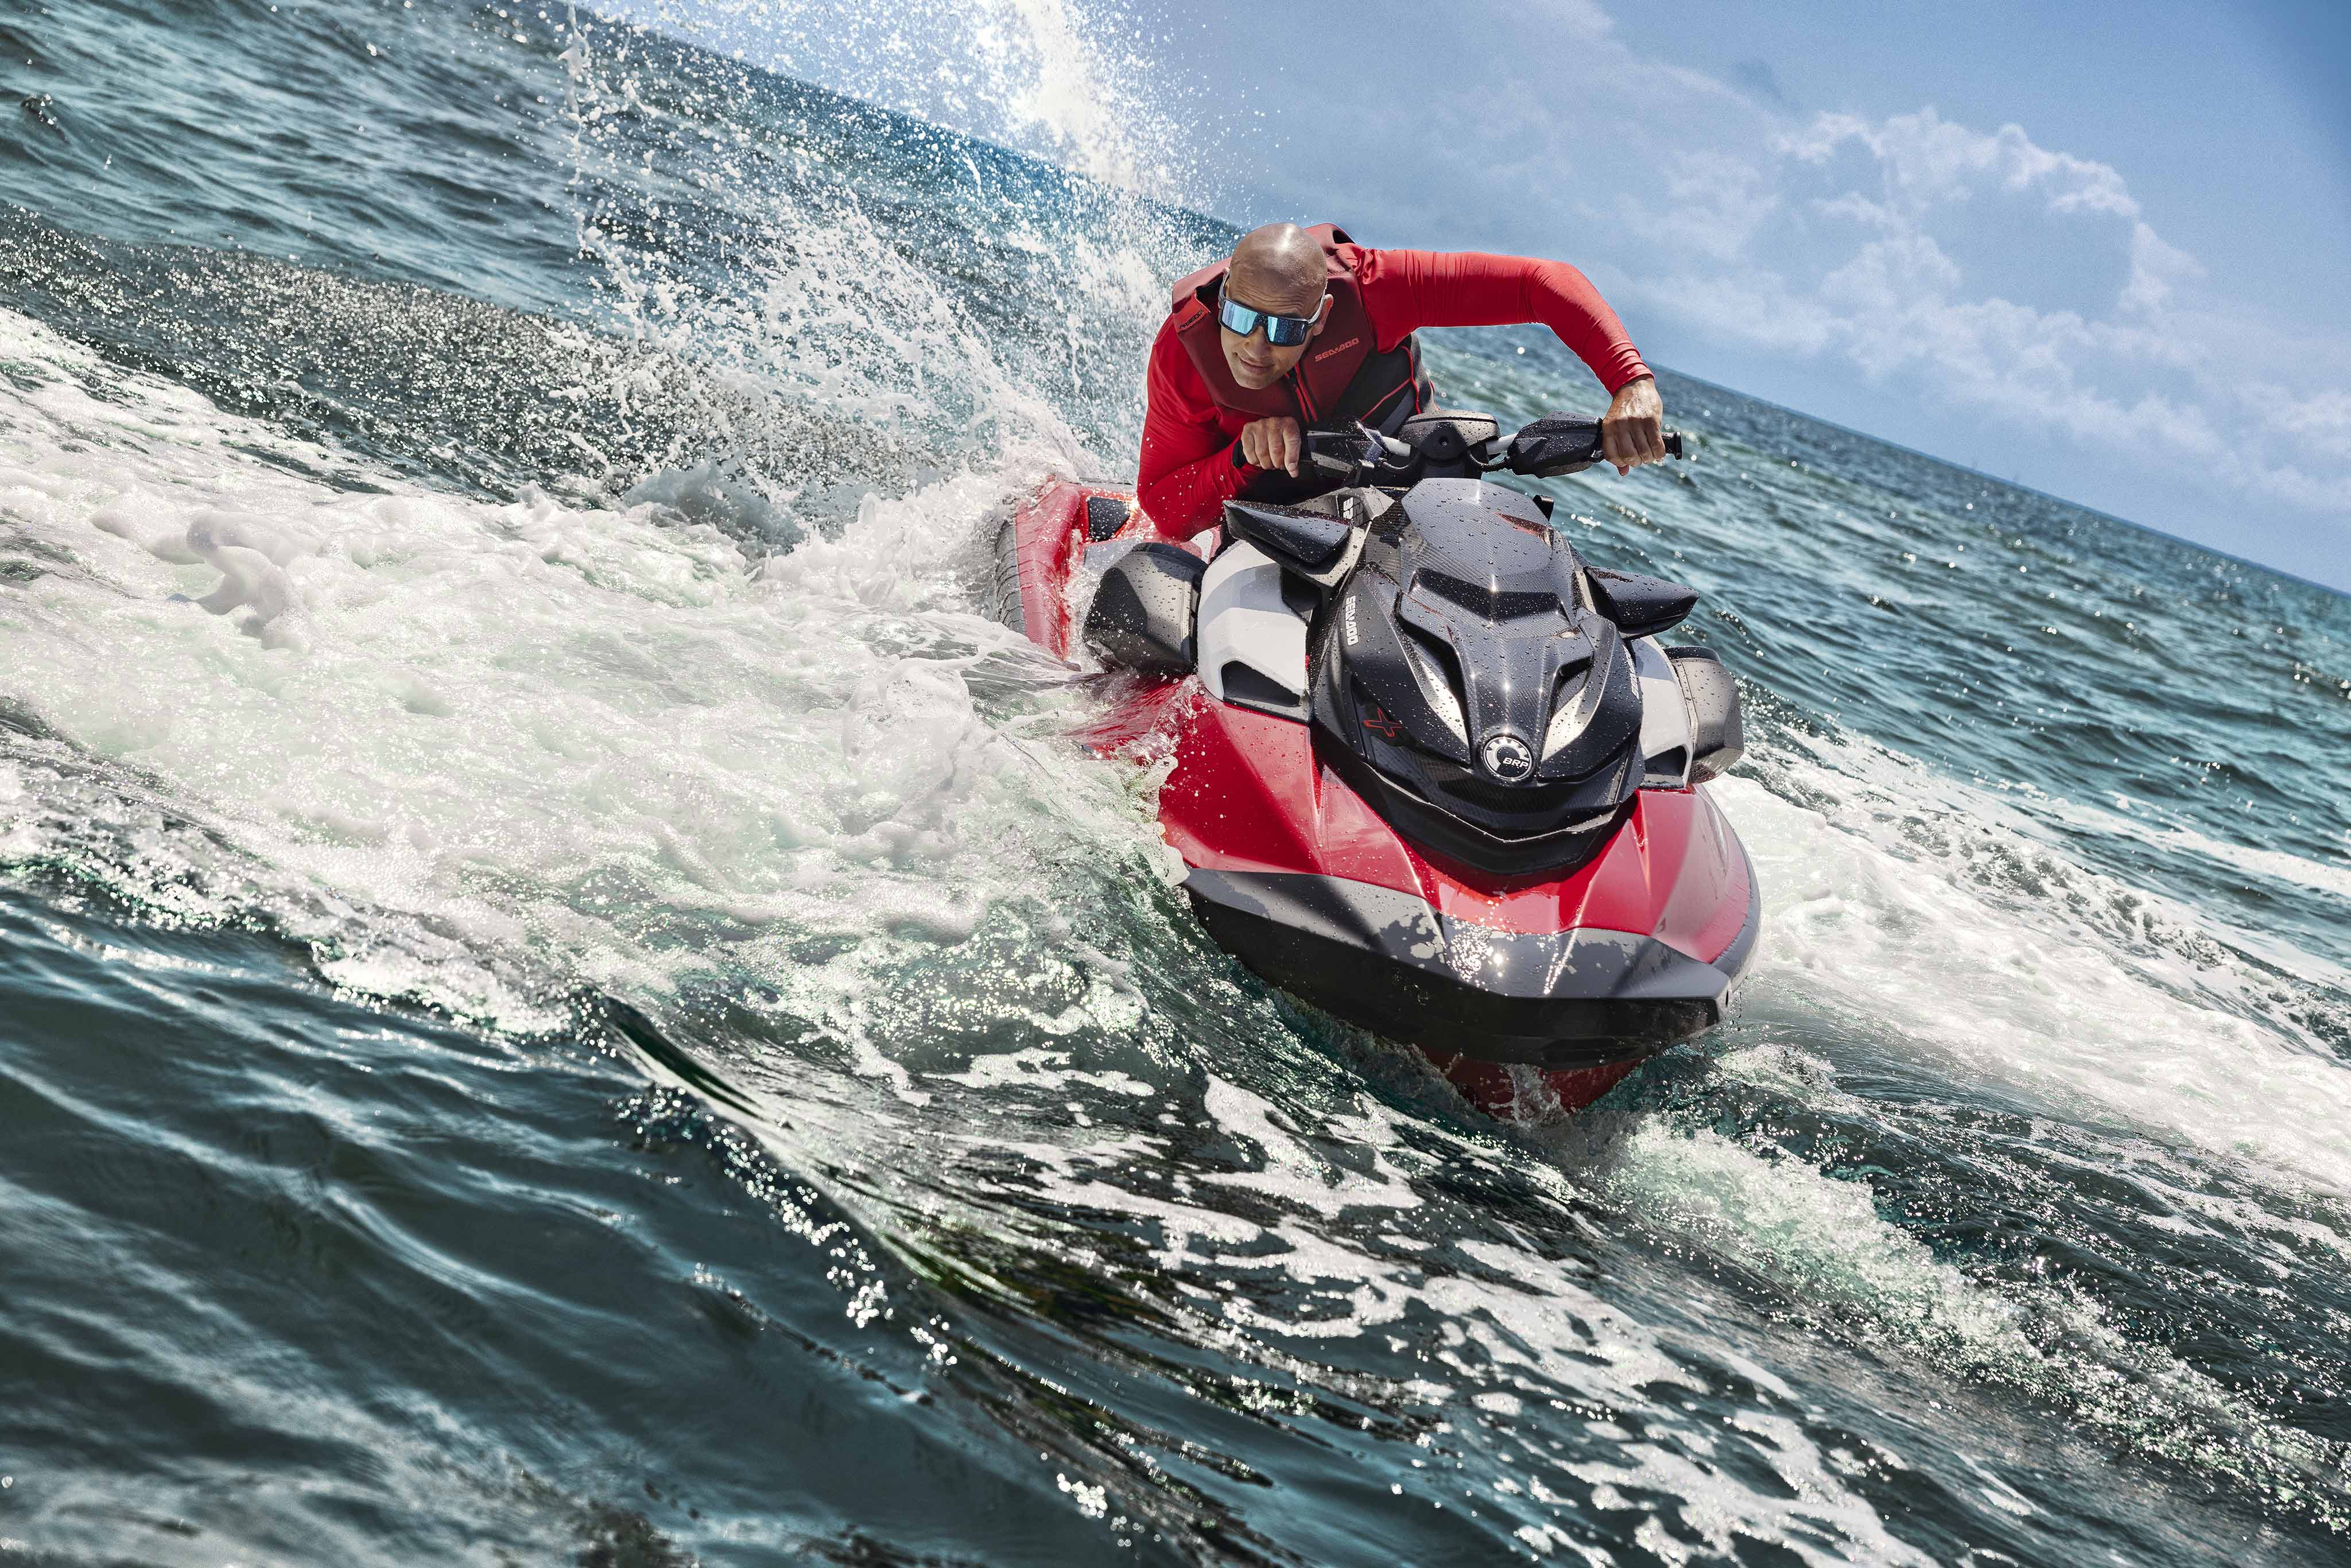 Man riding full speed on his Sea-Doo RXP-X high performance personal watercraft